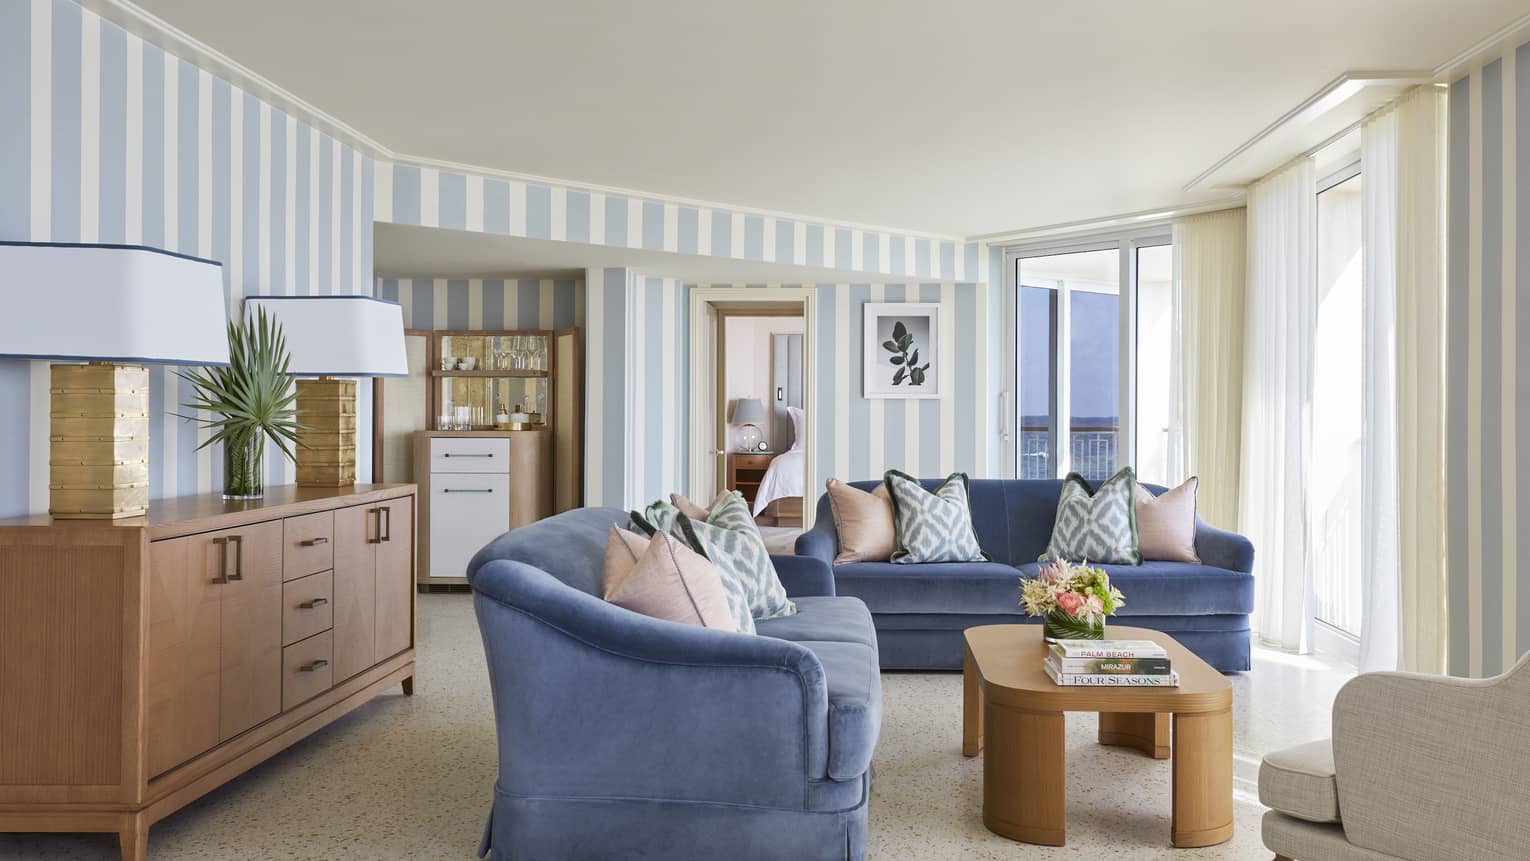 Living area in a Sea Breeze Suite, with blue sofas, a coffee table and light blue- and white-striped walls